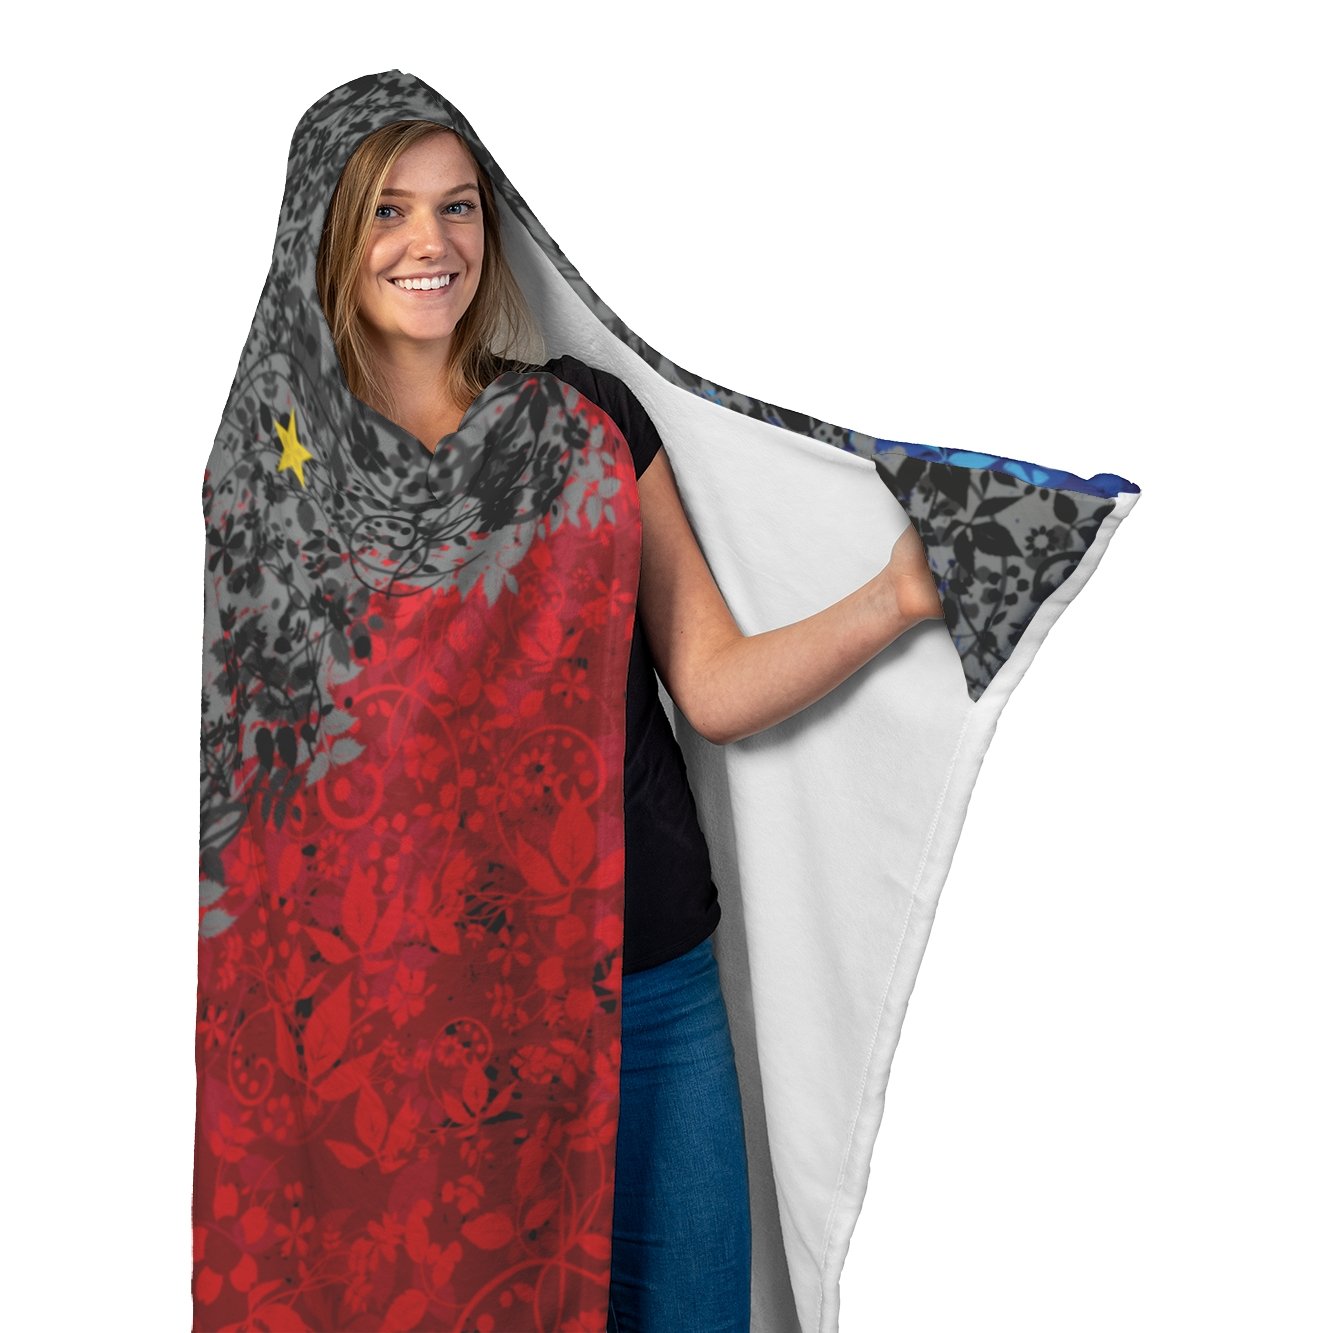 Philippines Floral Flag Hooded BlanketHooded Blanket - My E Three